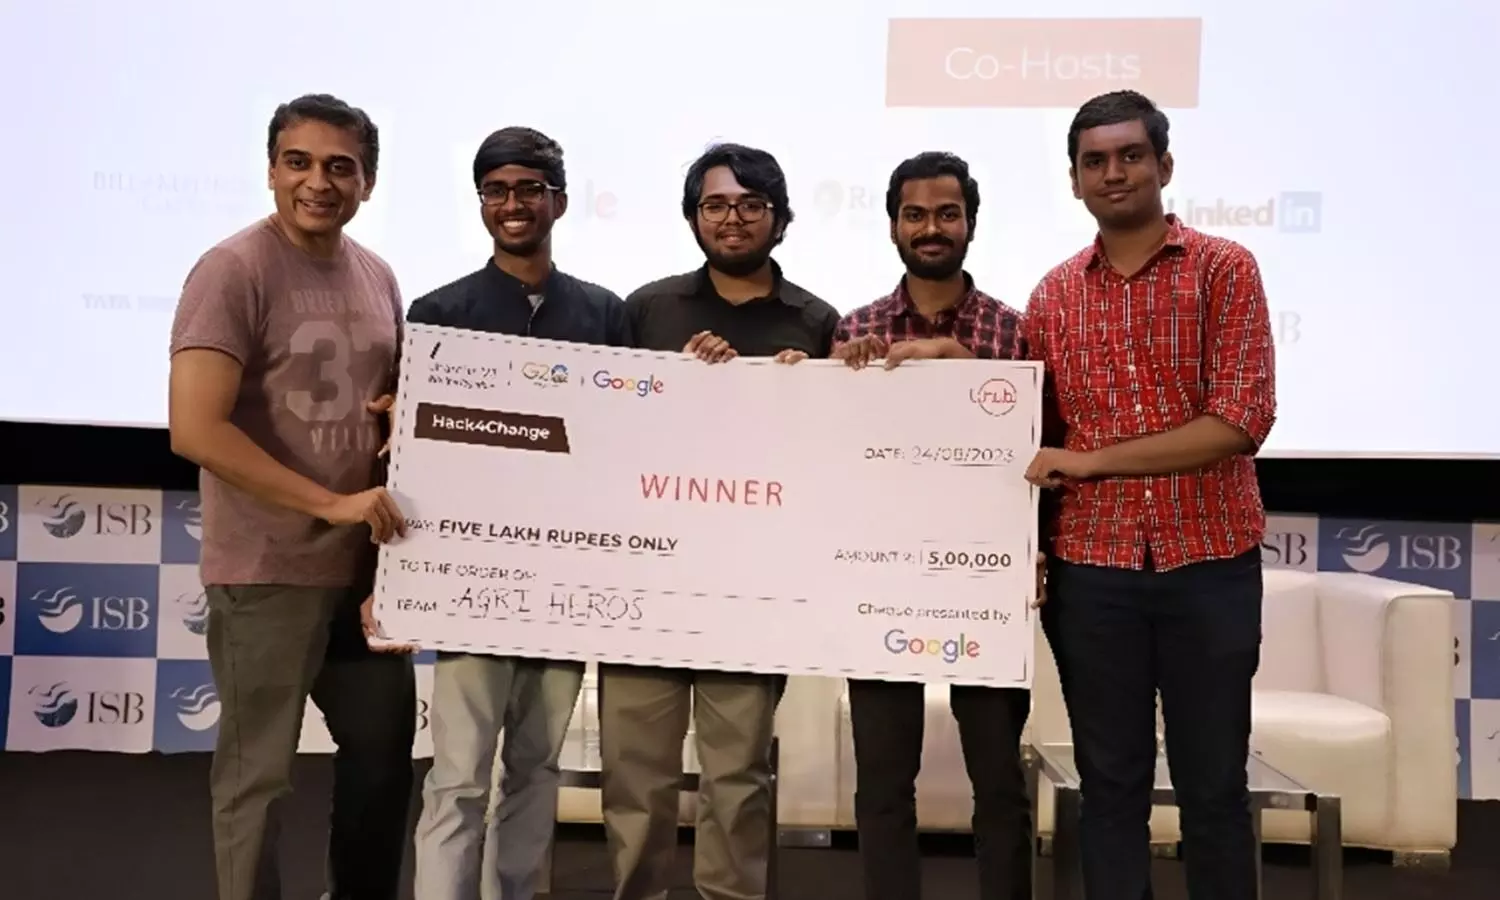 Team Agri Heroes android app bags first prize at tech-driven Charcha23 summit